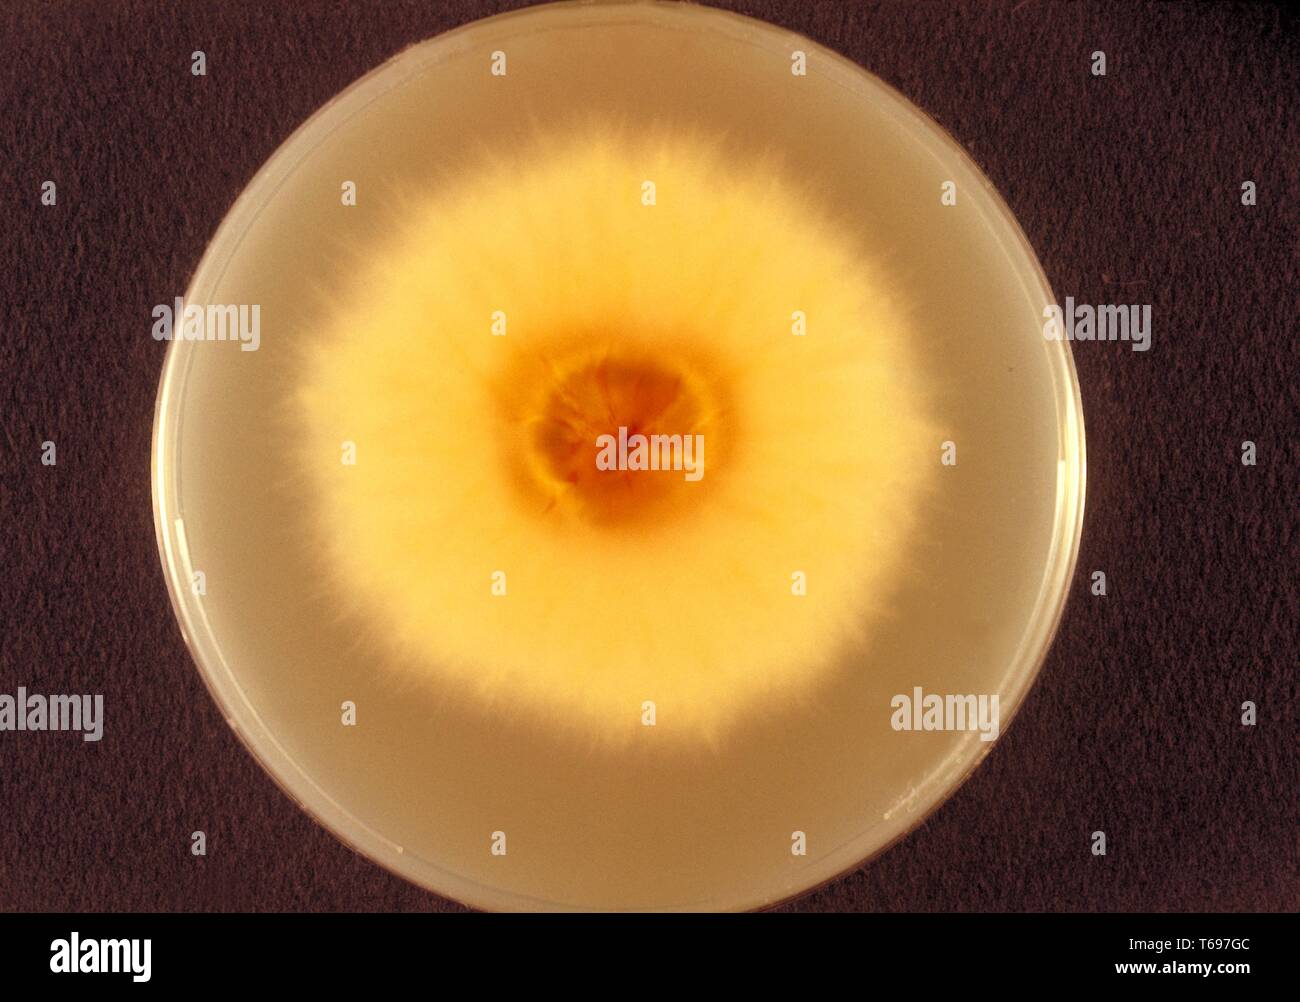 Bottom view photograph of the Sebouraud dextrose agar plate culture growing a colony of Microsporum persicolor fungus, 1973. Image courtesy Centers for Disease Control and Prevention (CDC) / Dr Arvind A. Padhye. () Stock Photo